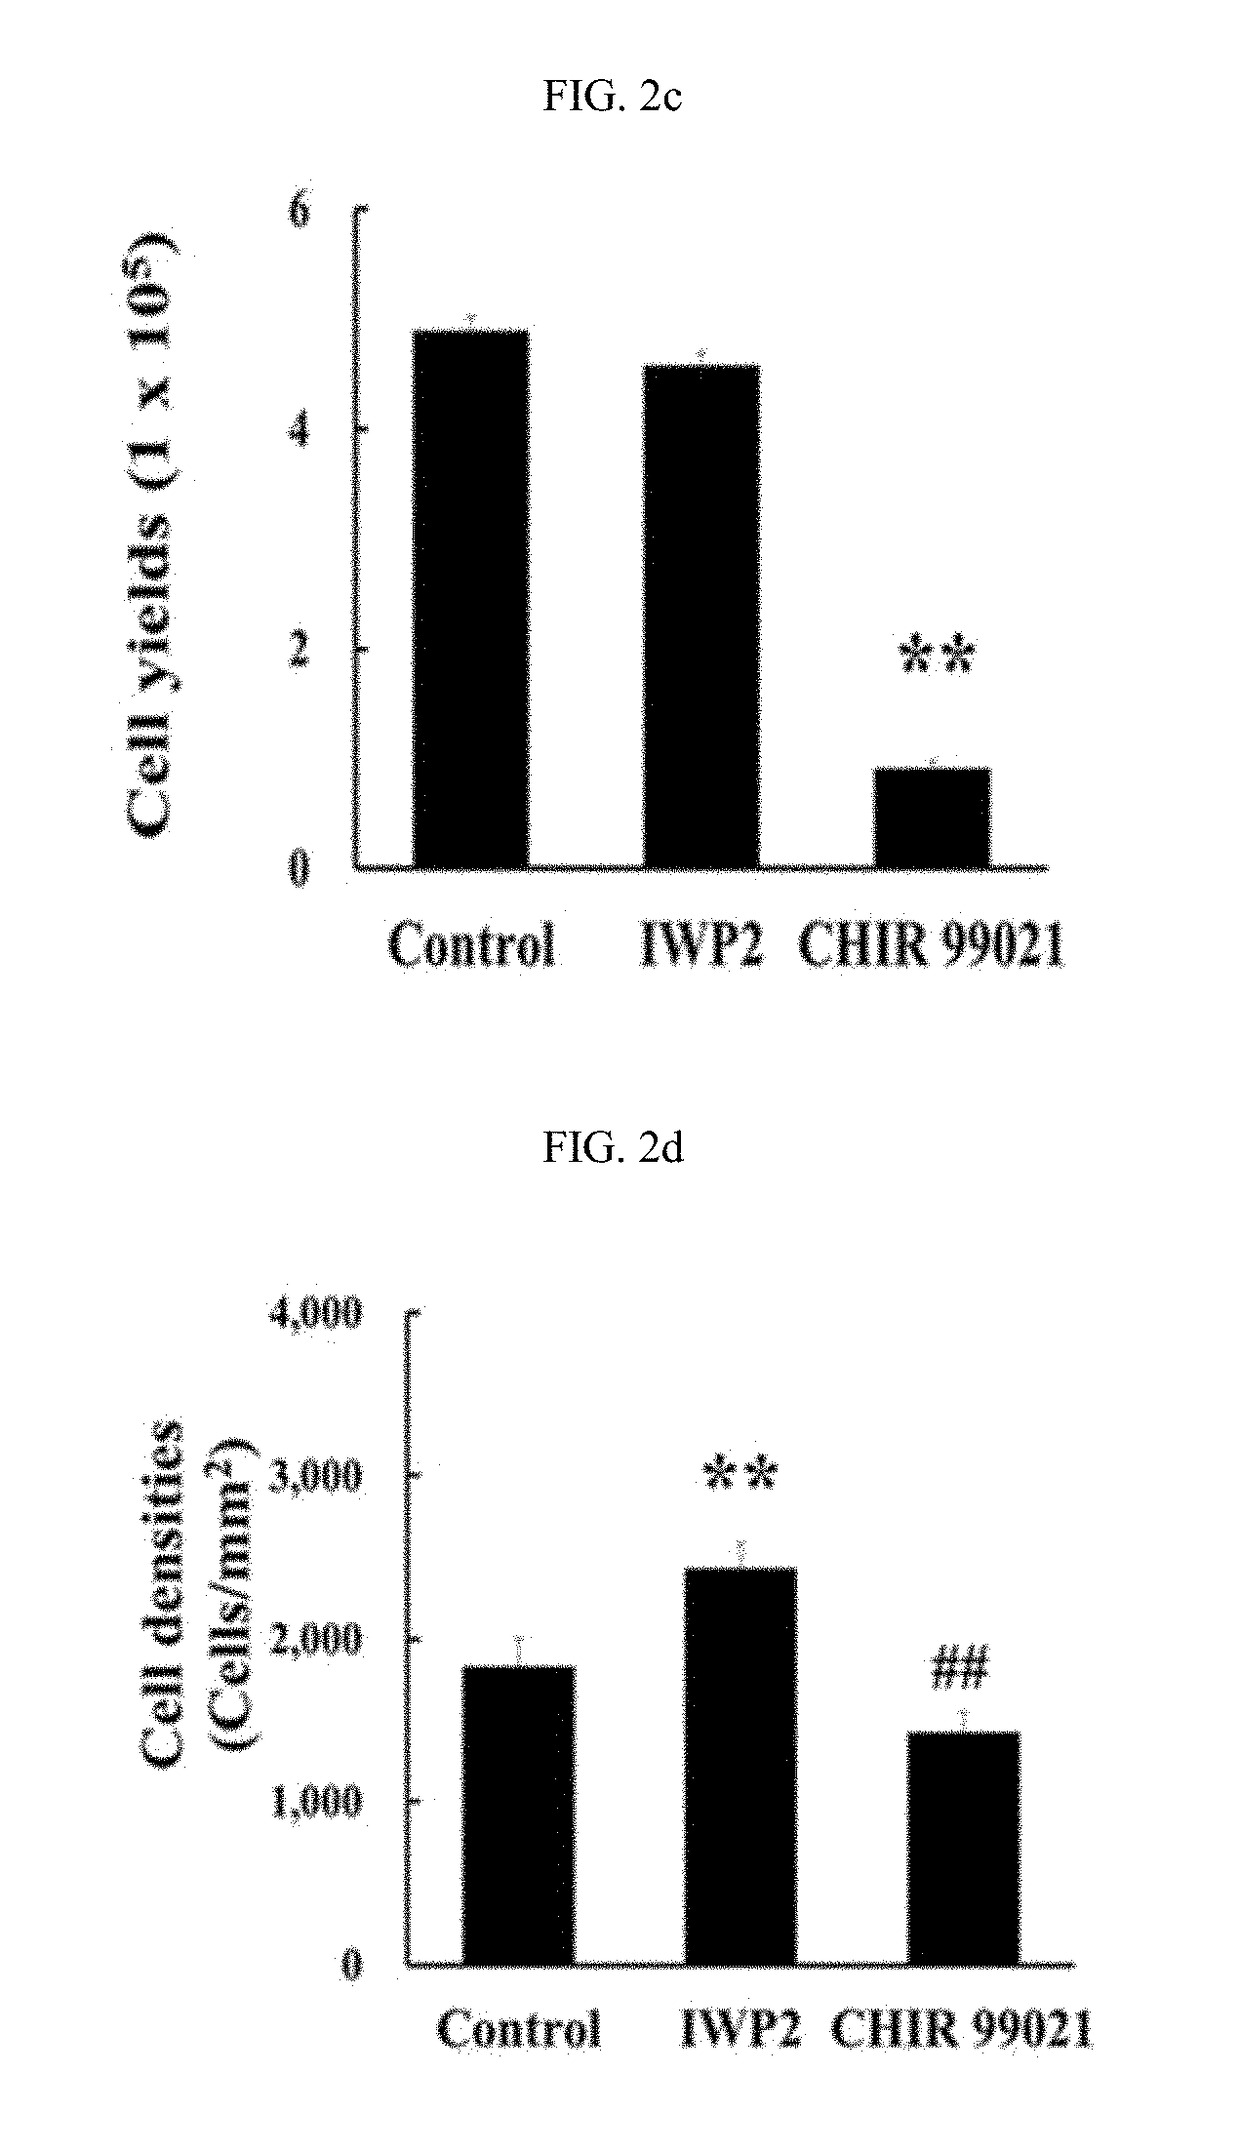 Methods for improving proliferation and stemness of limbal stem cells